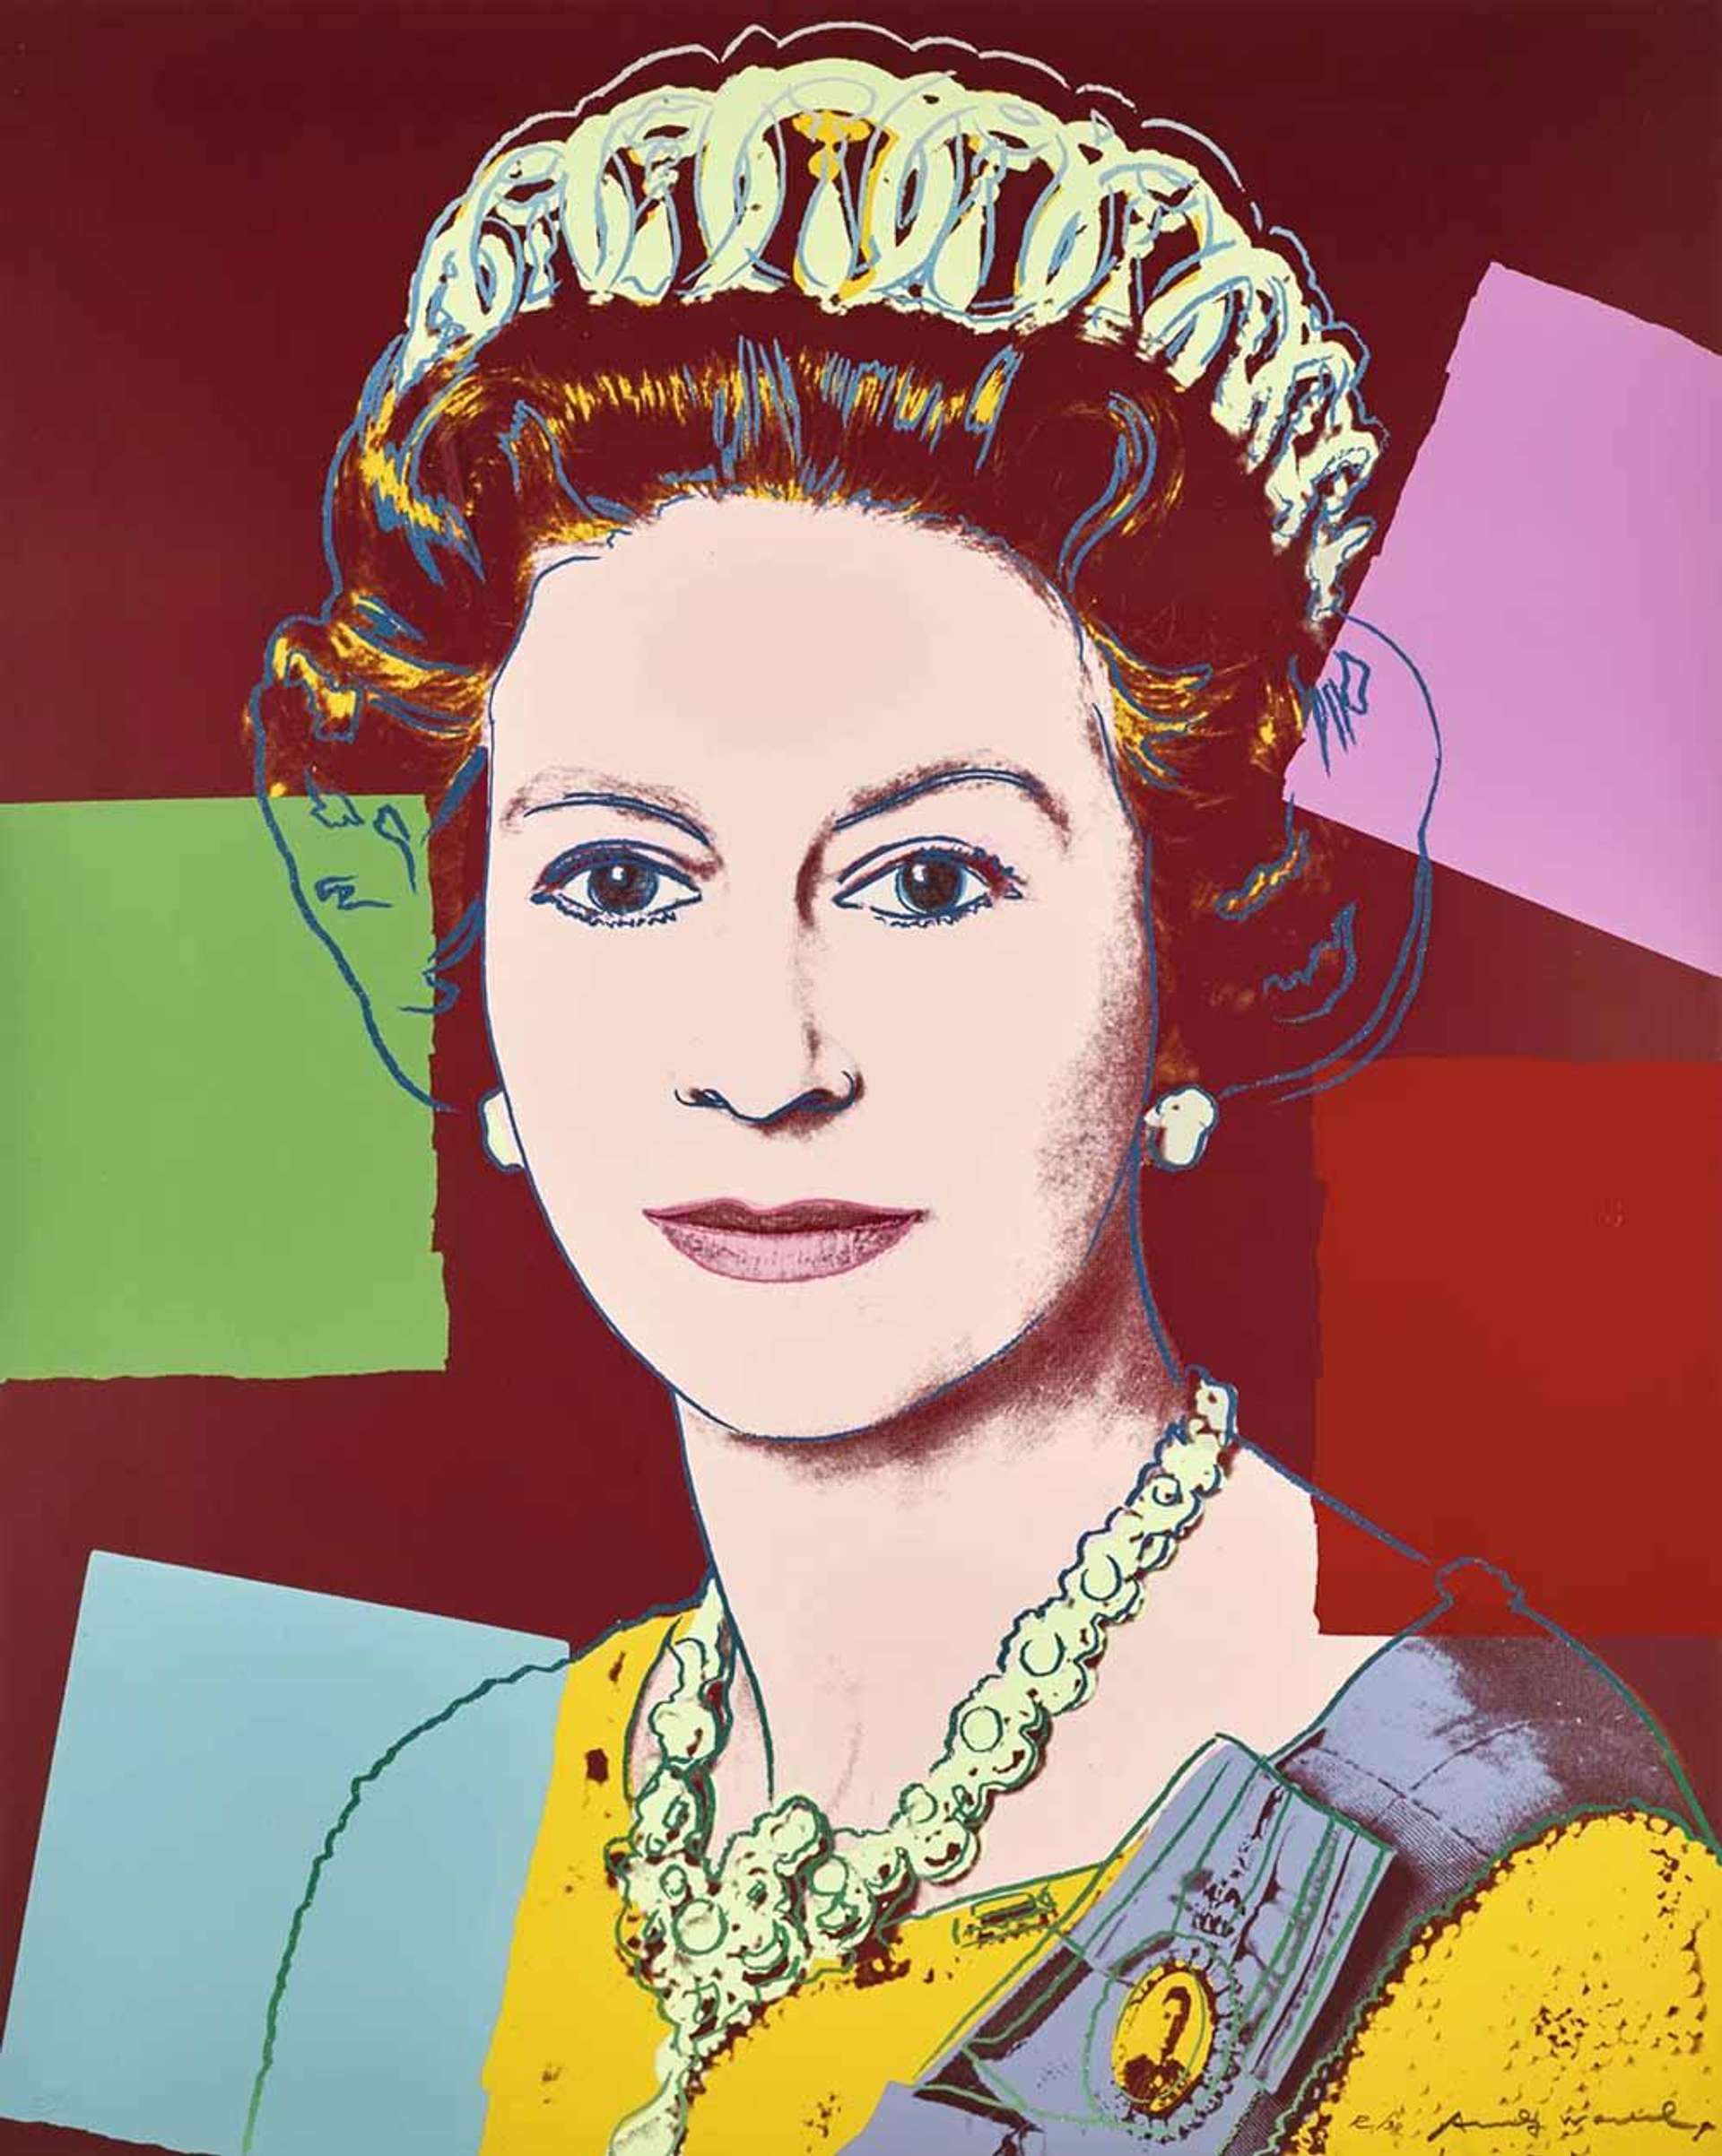 A screenprint by Andy Warhol depicting Queen Elizabeth II against a red background with collaged blocks of blue, green, pink and red.